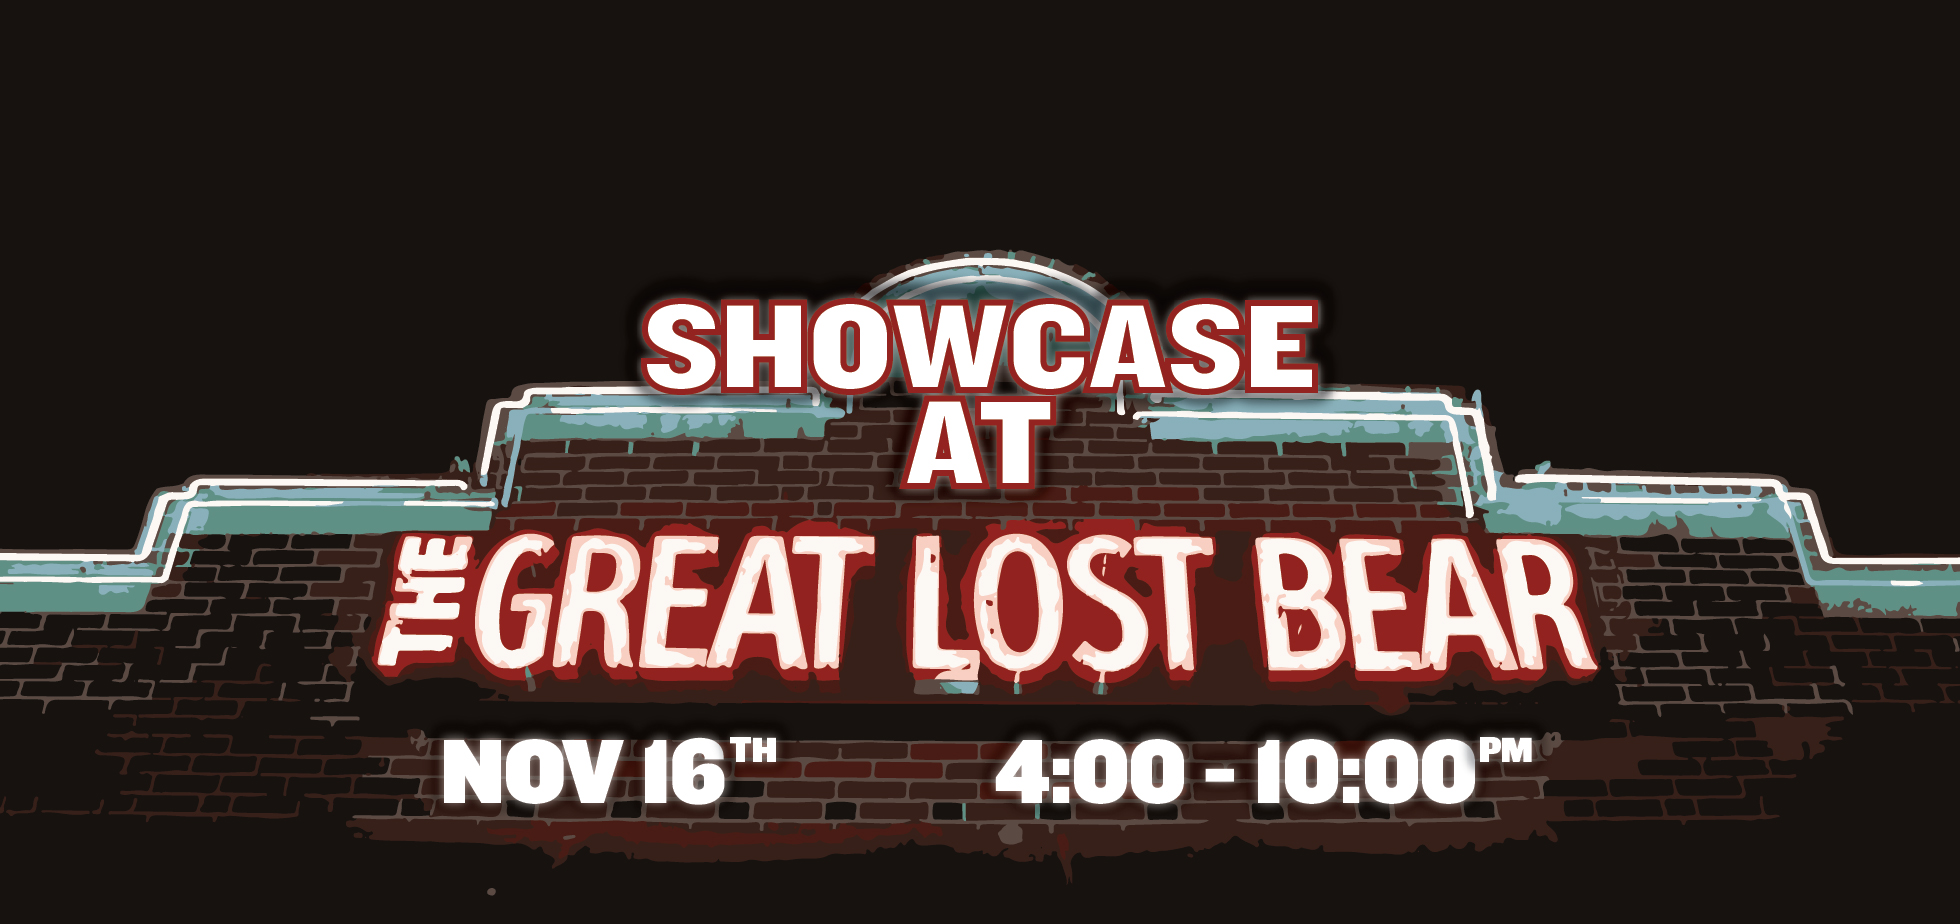 image showcasing an event we have at The Great Lost Bear on November 16th